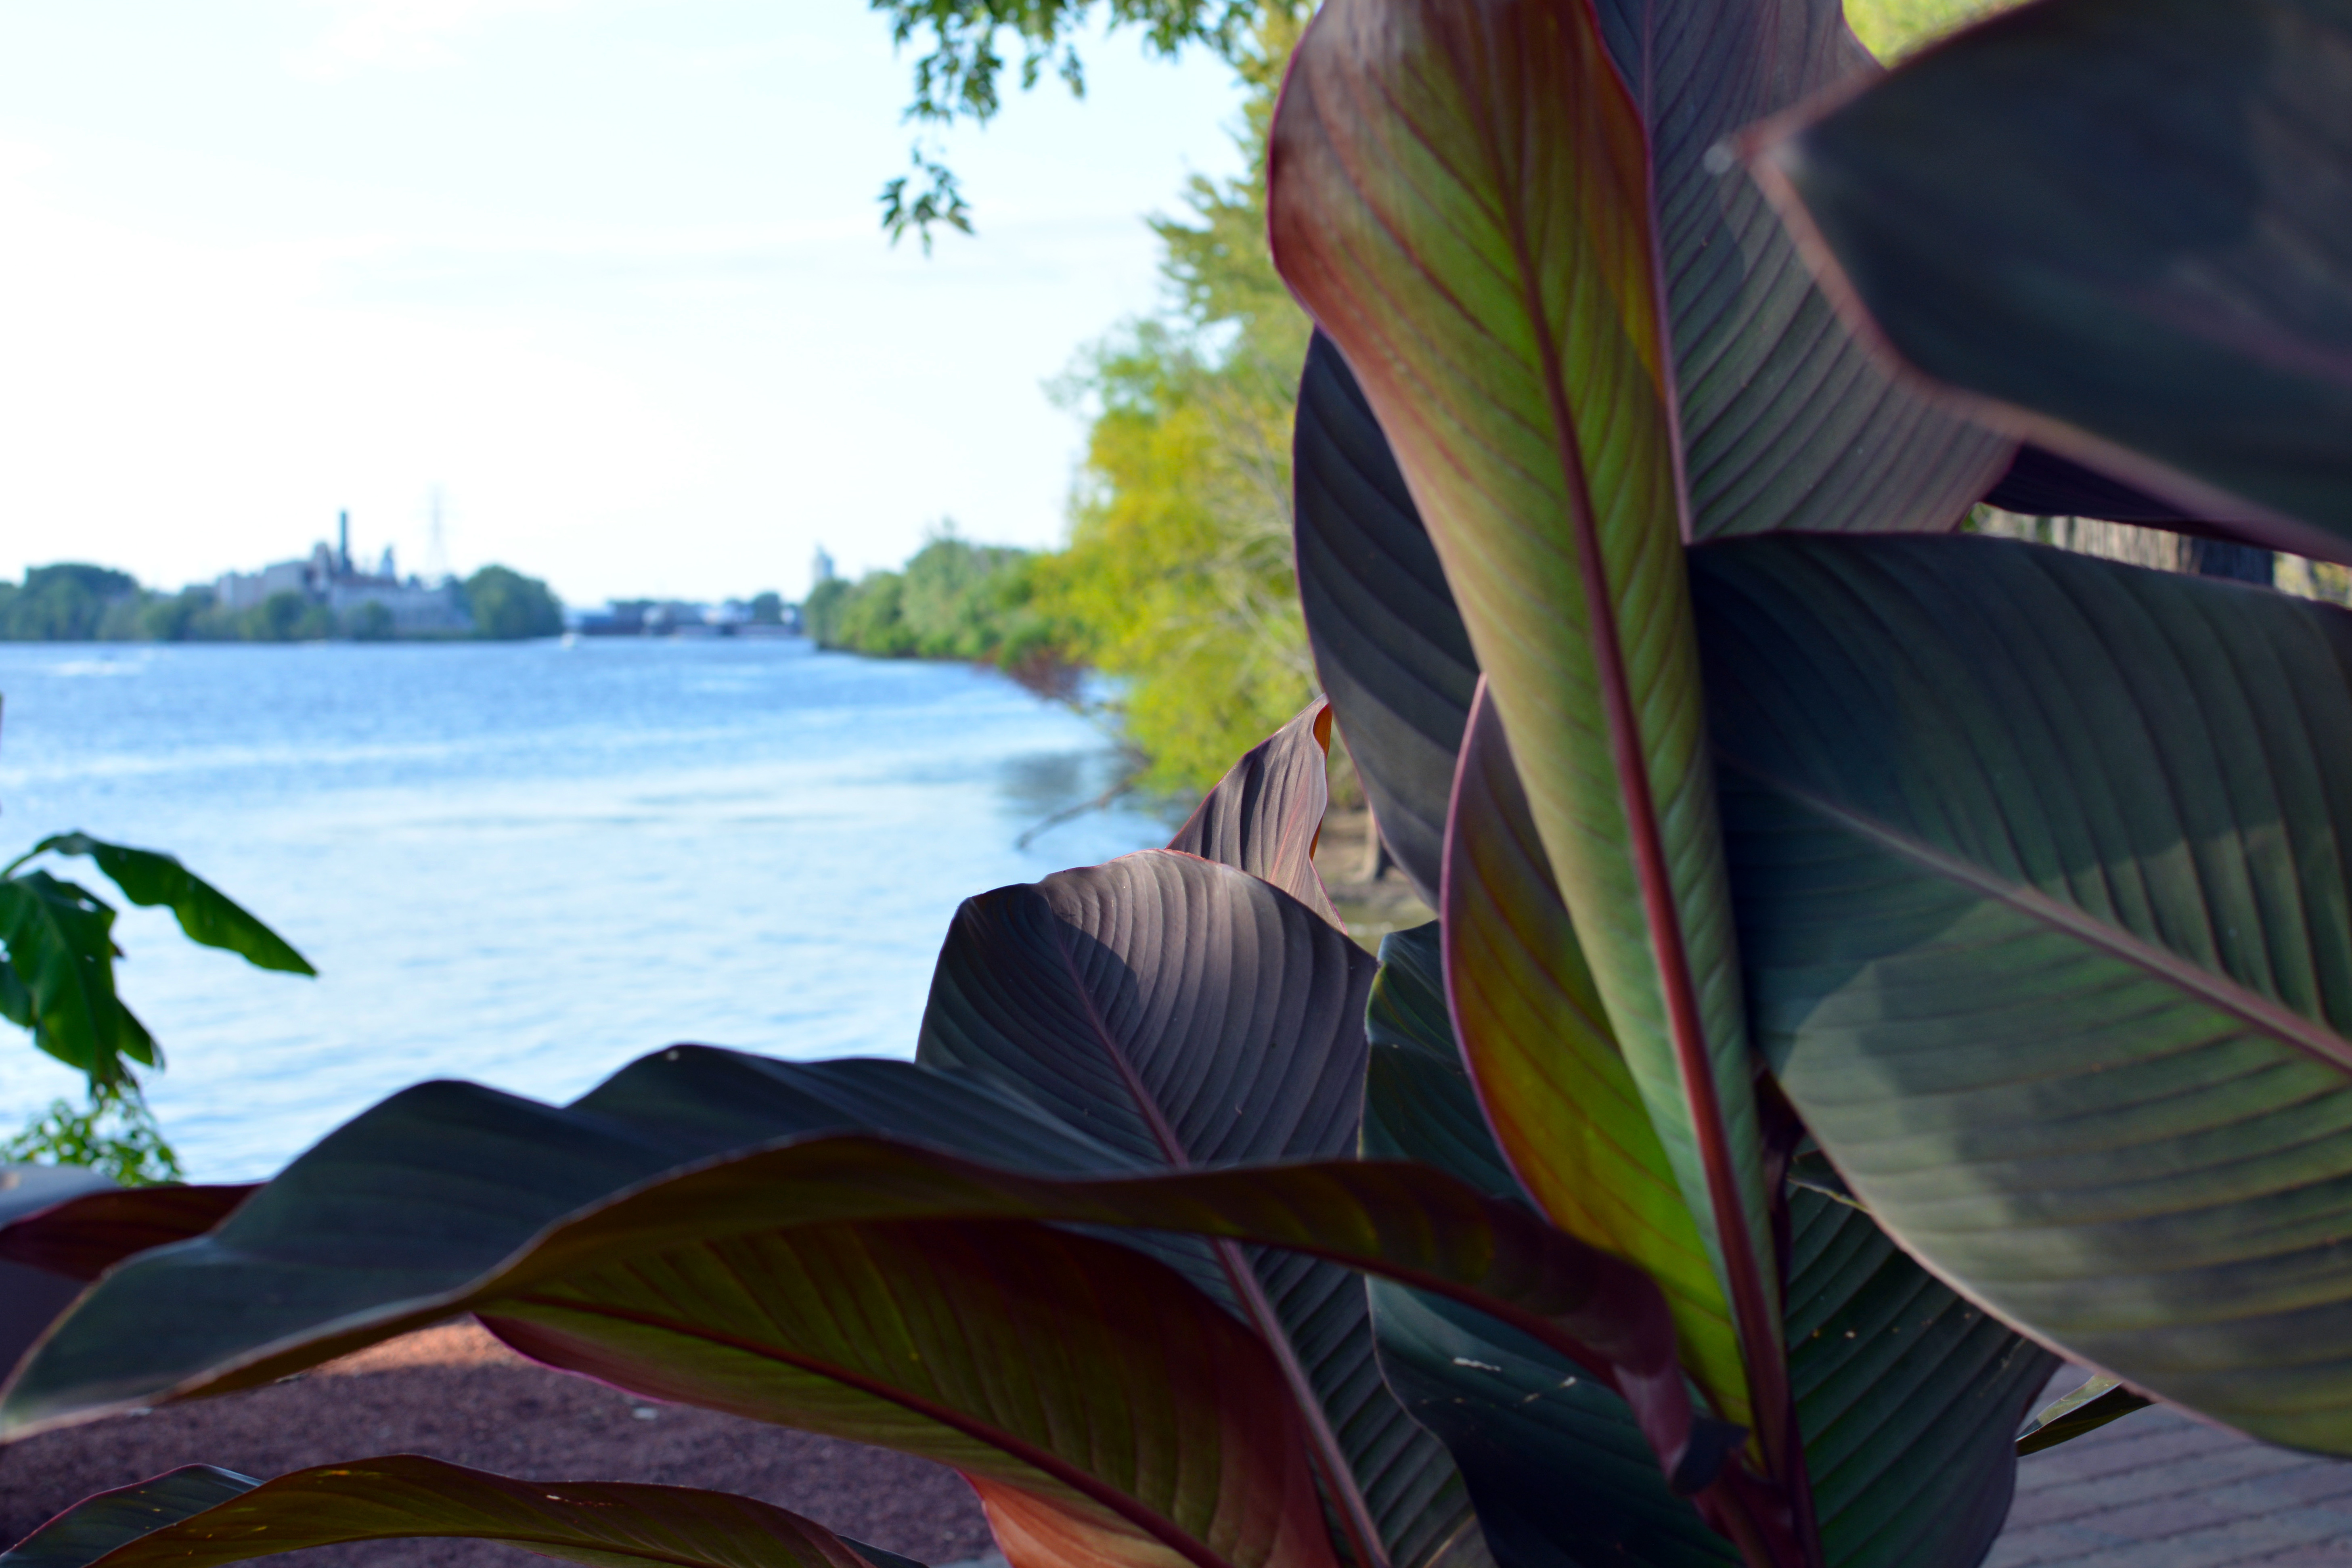 The view of the Mississippi river through leaves at the International Friendship Gardens